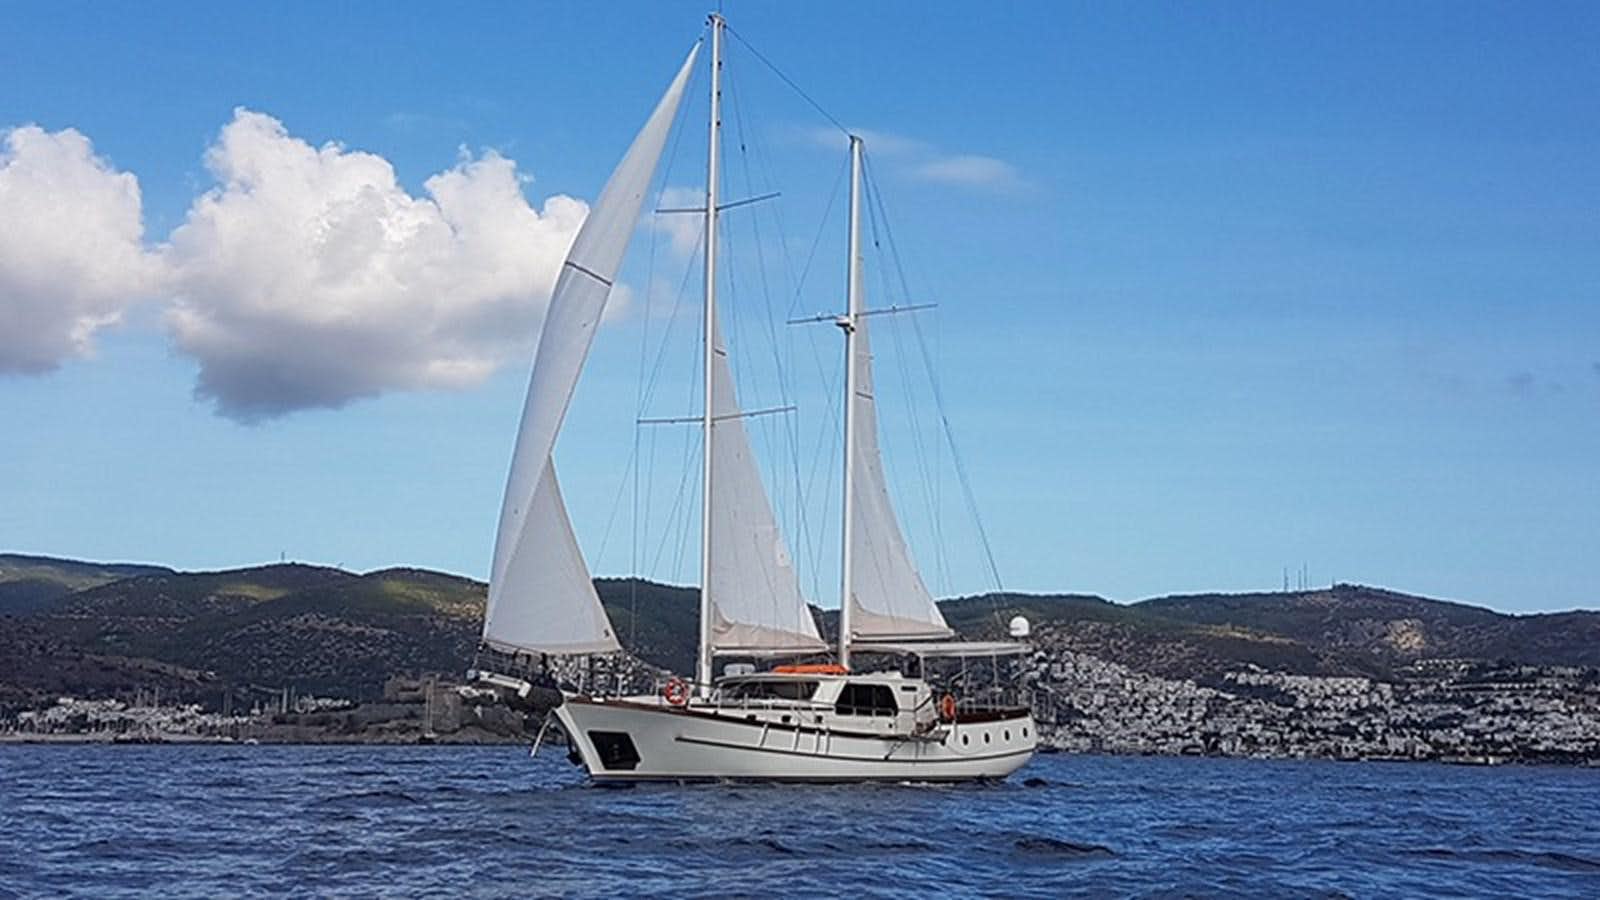 Elifim 11
Yacht for Sale